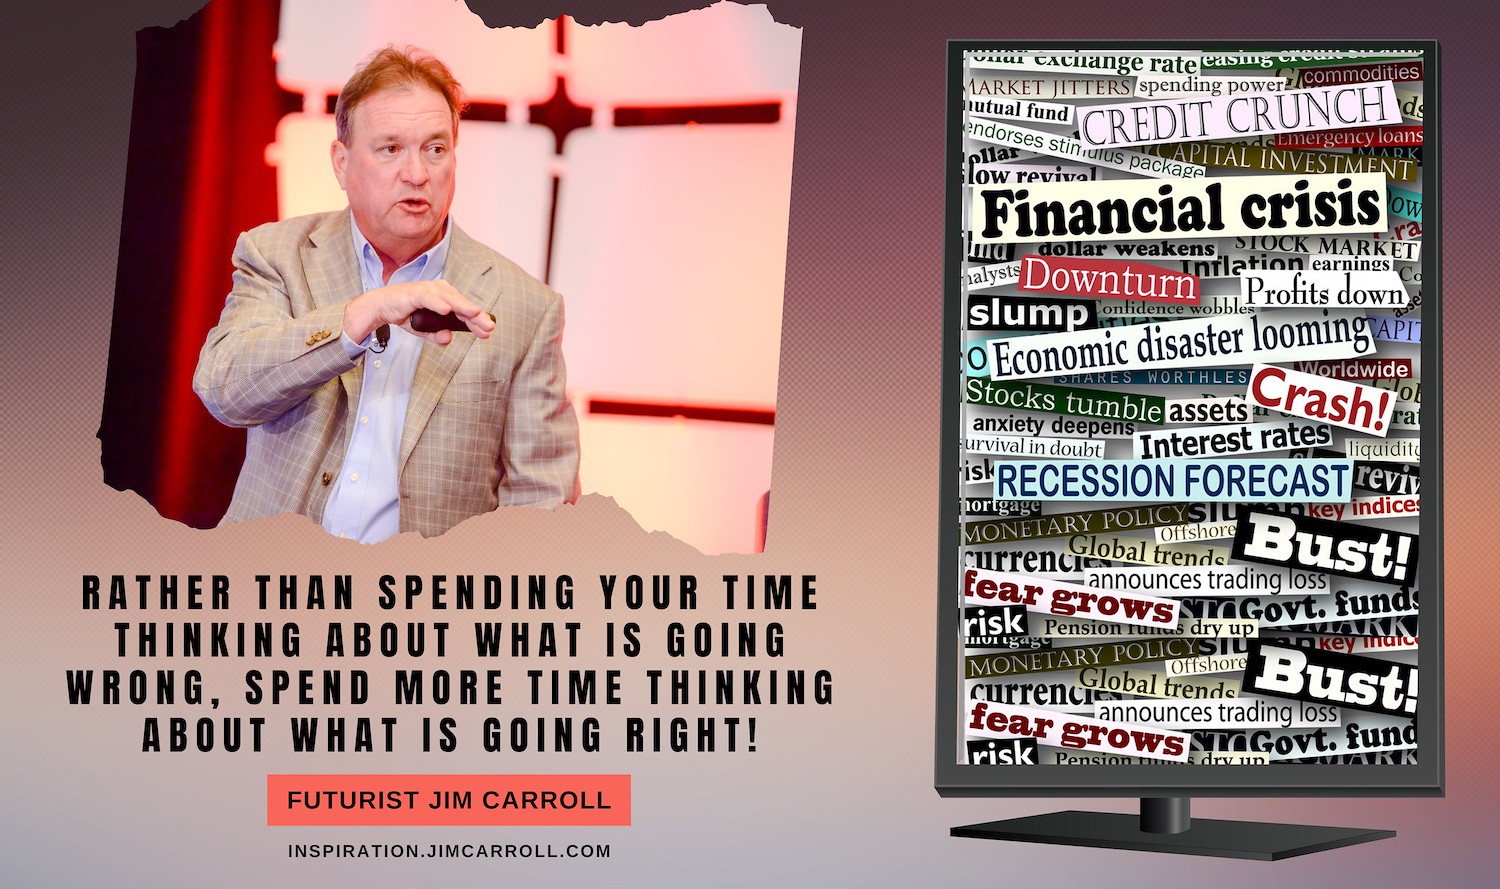 "Rather than spending your time thinking about what is going wrong, spend more time thinking about what is going right!" - Futurist Jim Carroll